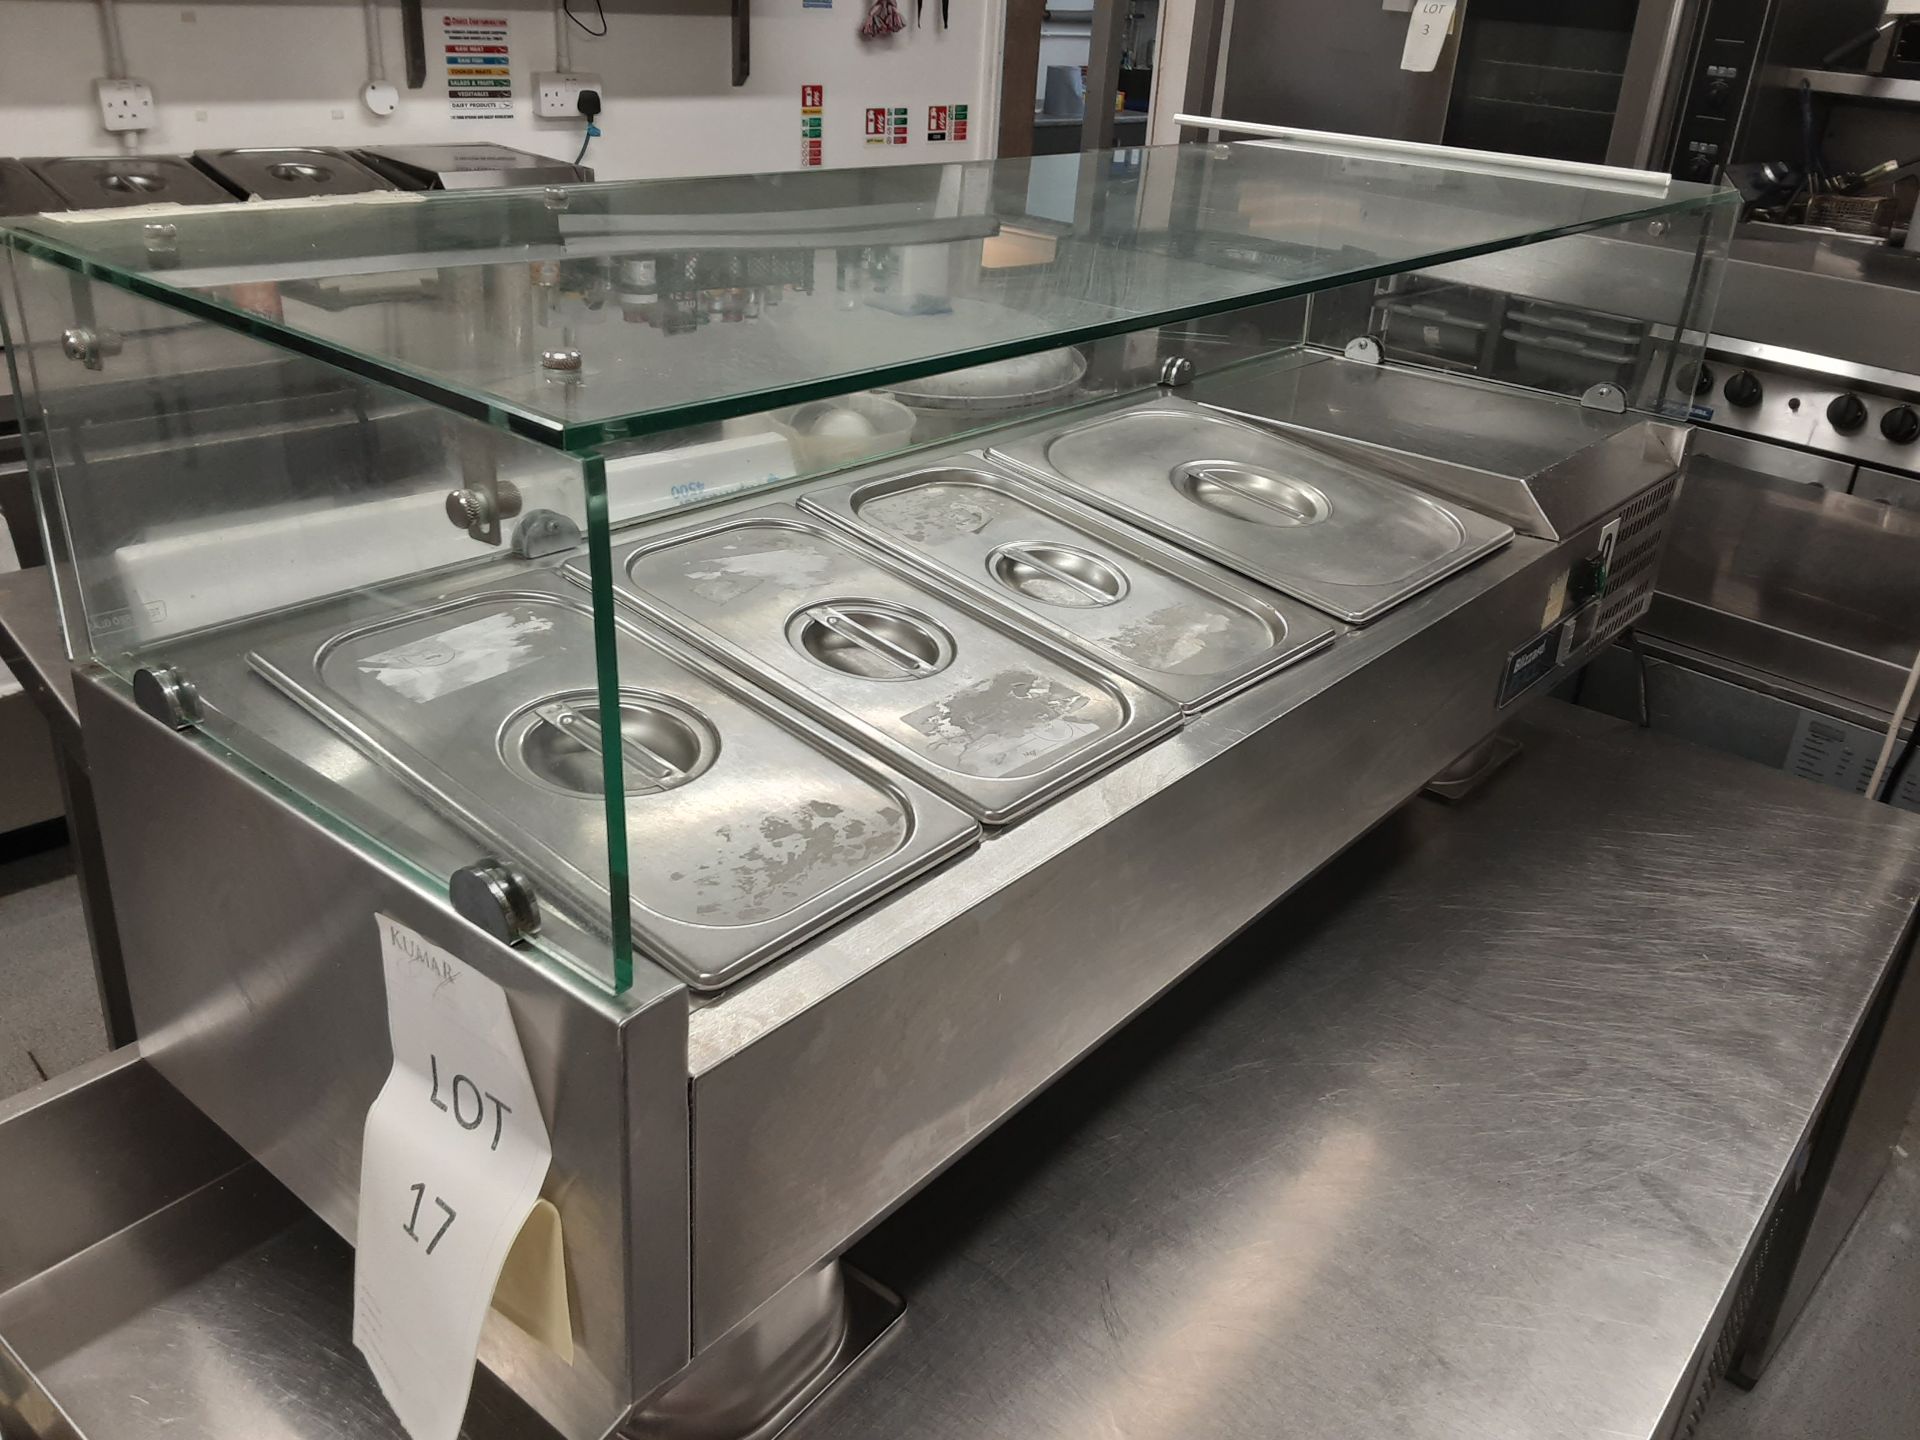 Blizzard TOP1200CR Refrigerated Preparation Top serial No 3AA3AR17223100017 Manufactured 08/2017 - Image 3 of 5